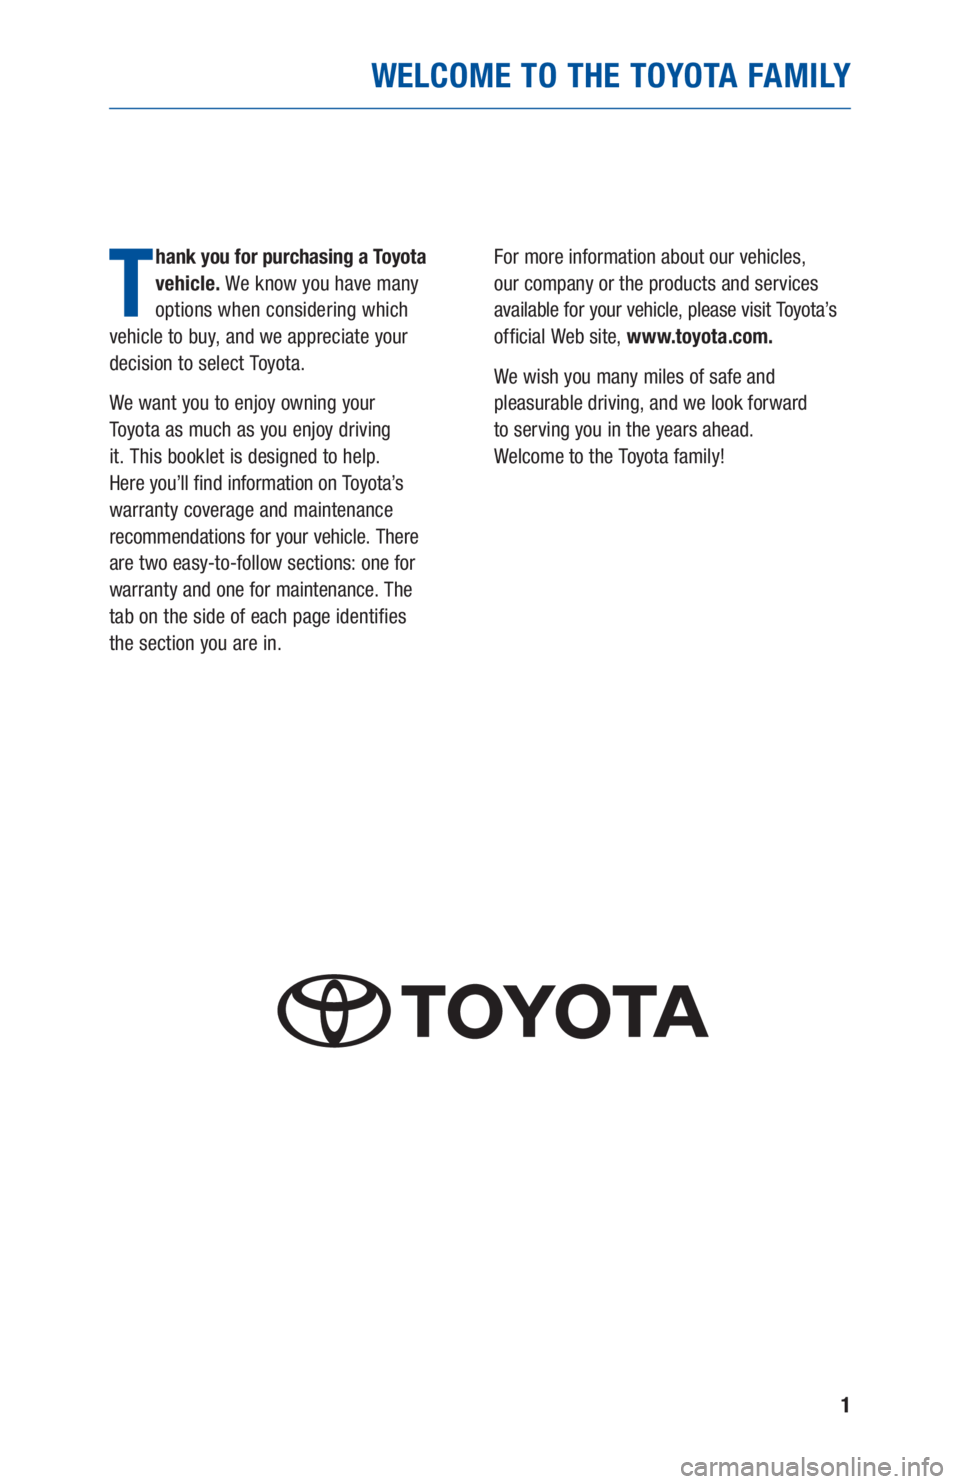 TOYOTA PRIUS 2019  Warranties & Maintenance Guides (in English) 1
WELCOME TO THE TOYOTA FAMILY
T
hank you for purchasing a Toyota 
vehicle. We know you have many 
options when considering which  
vehicle to buy, and we appreciate your 
decision to select Toyota.
W